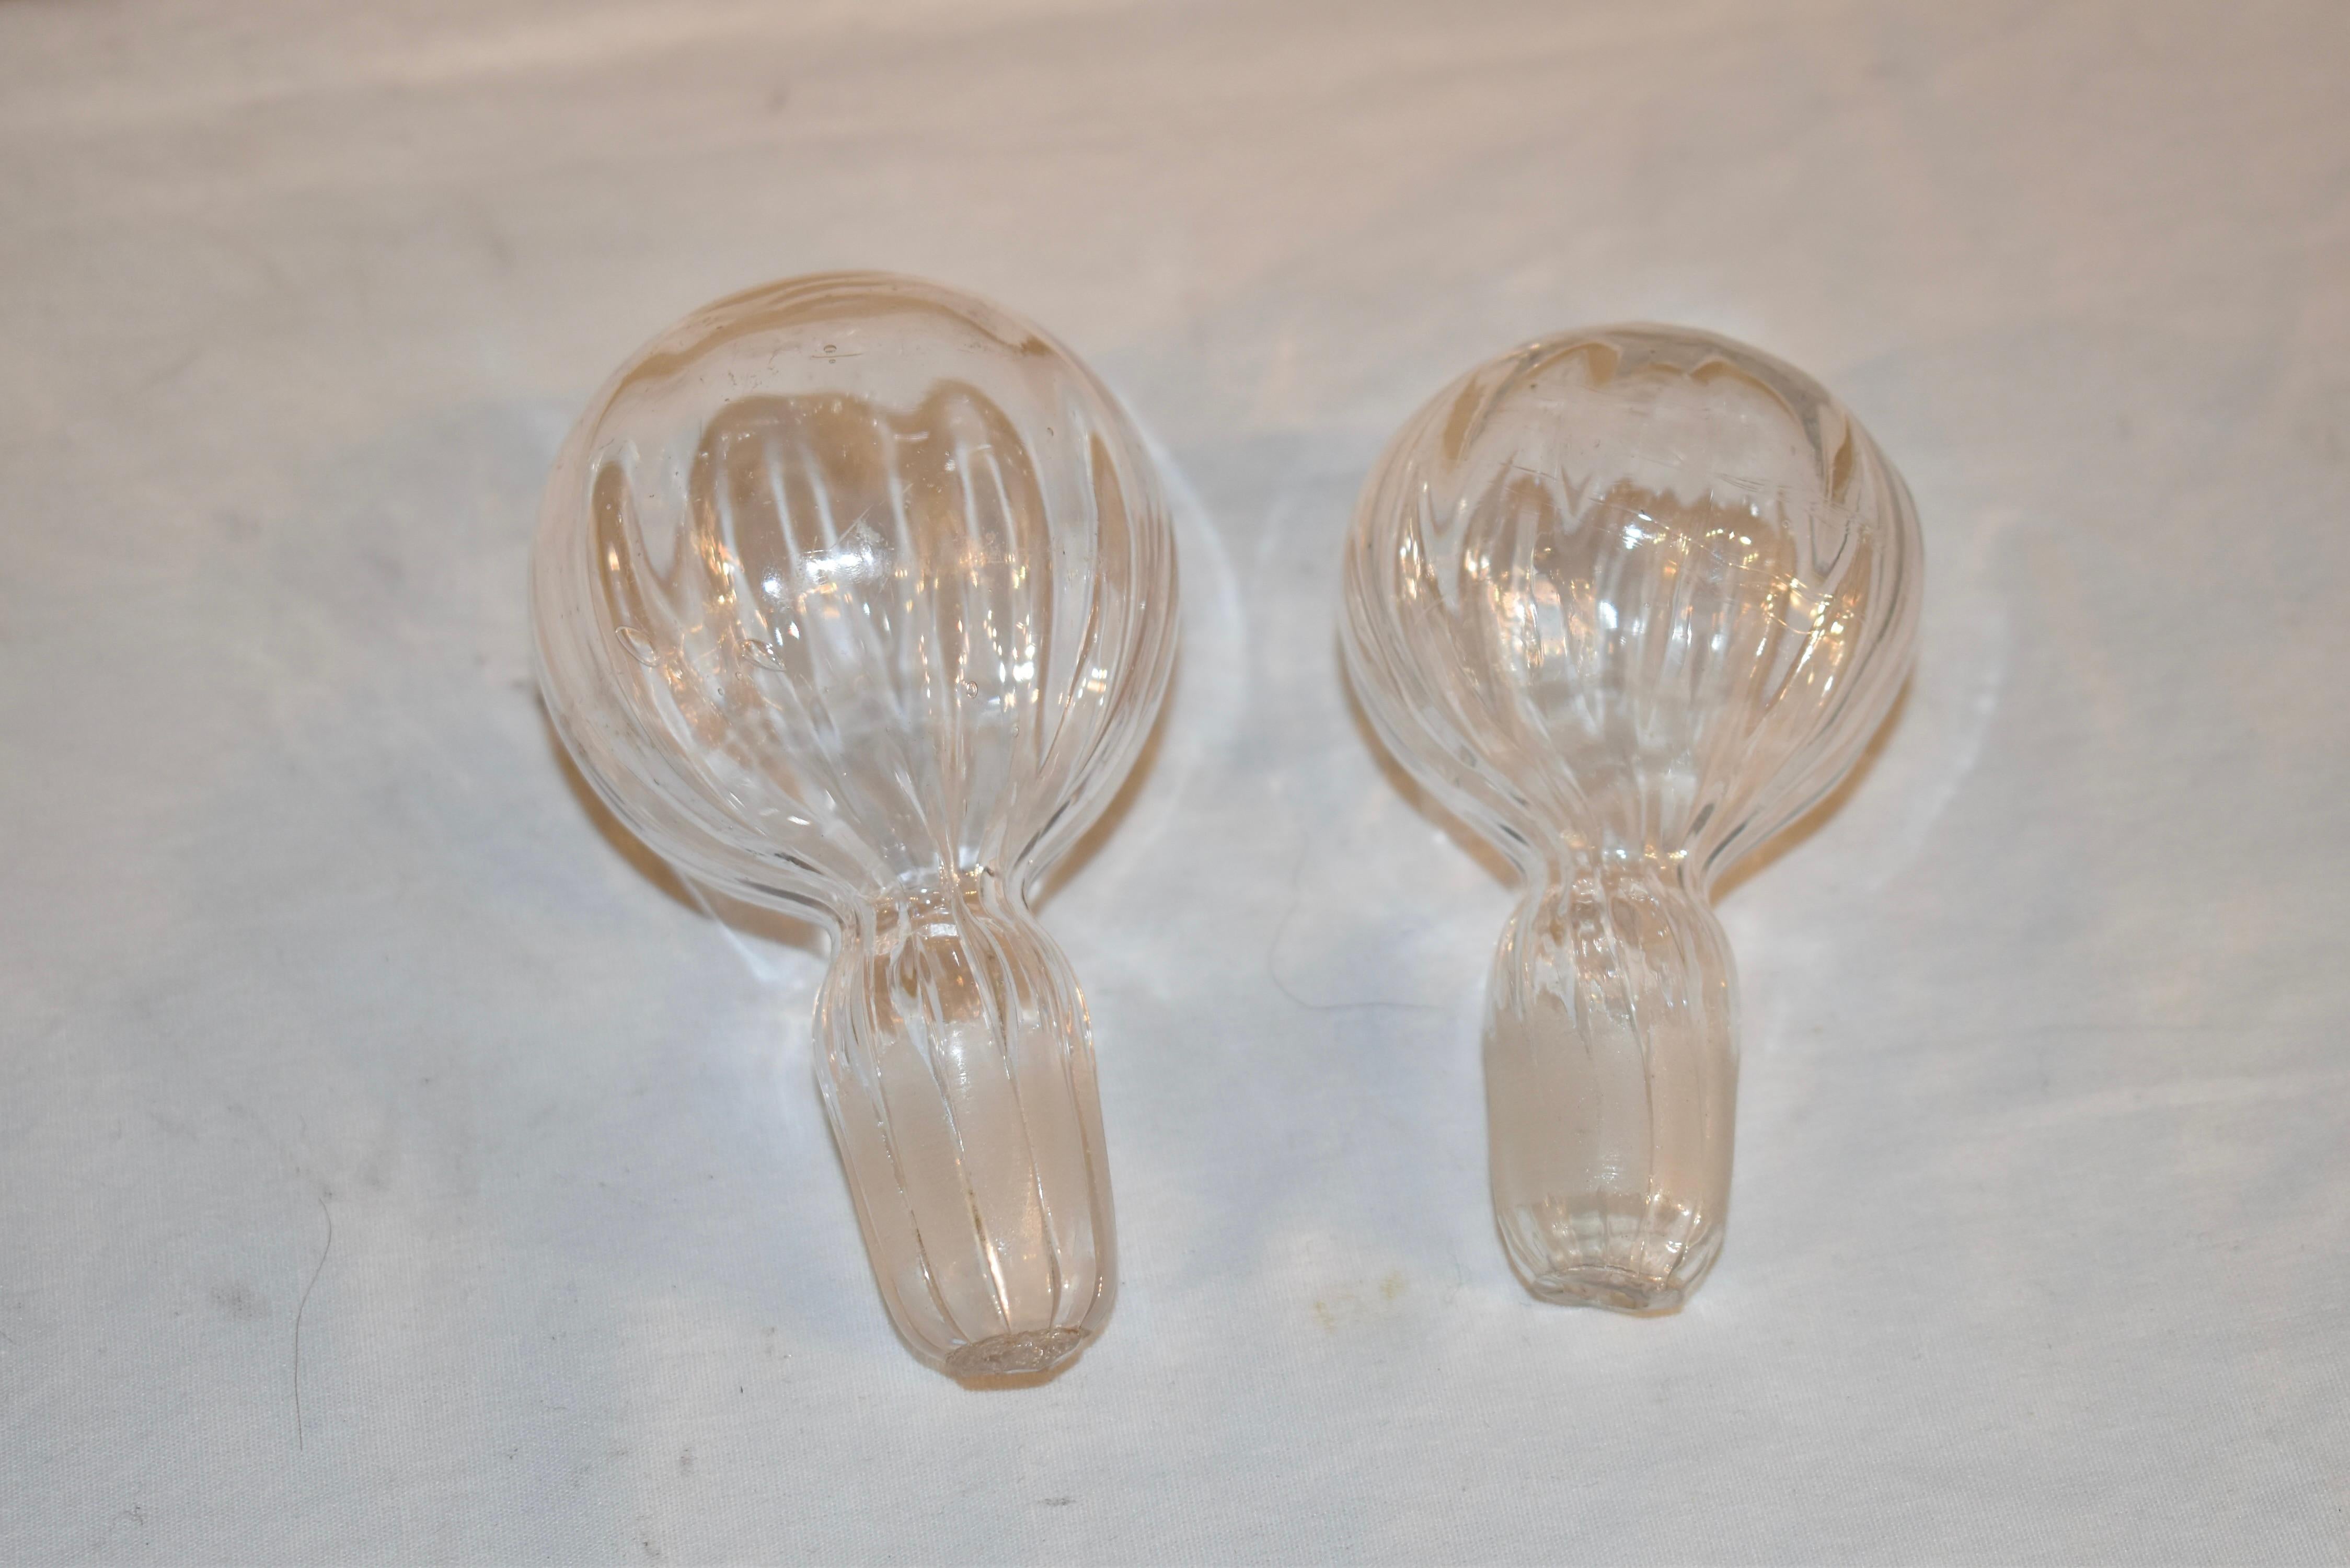 Pair of Early 19th Century American Mold Blown Decanters For Sale 2